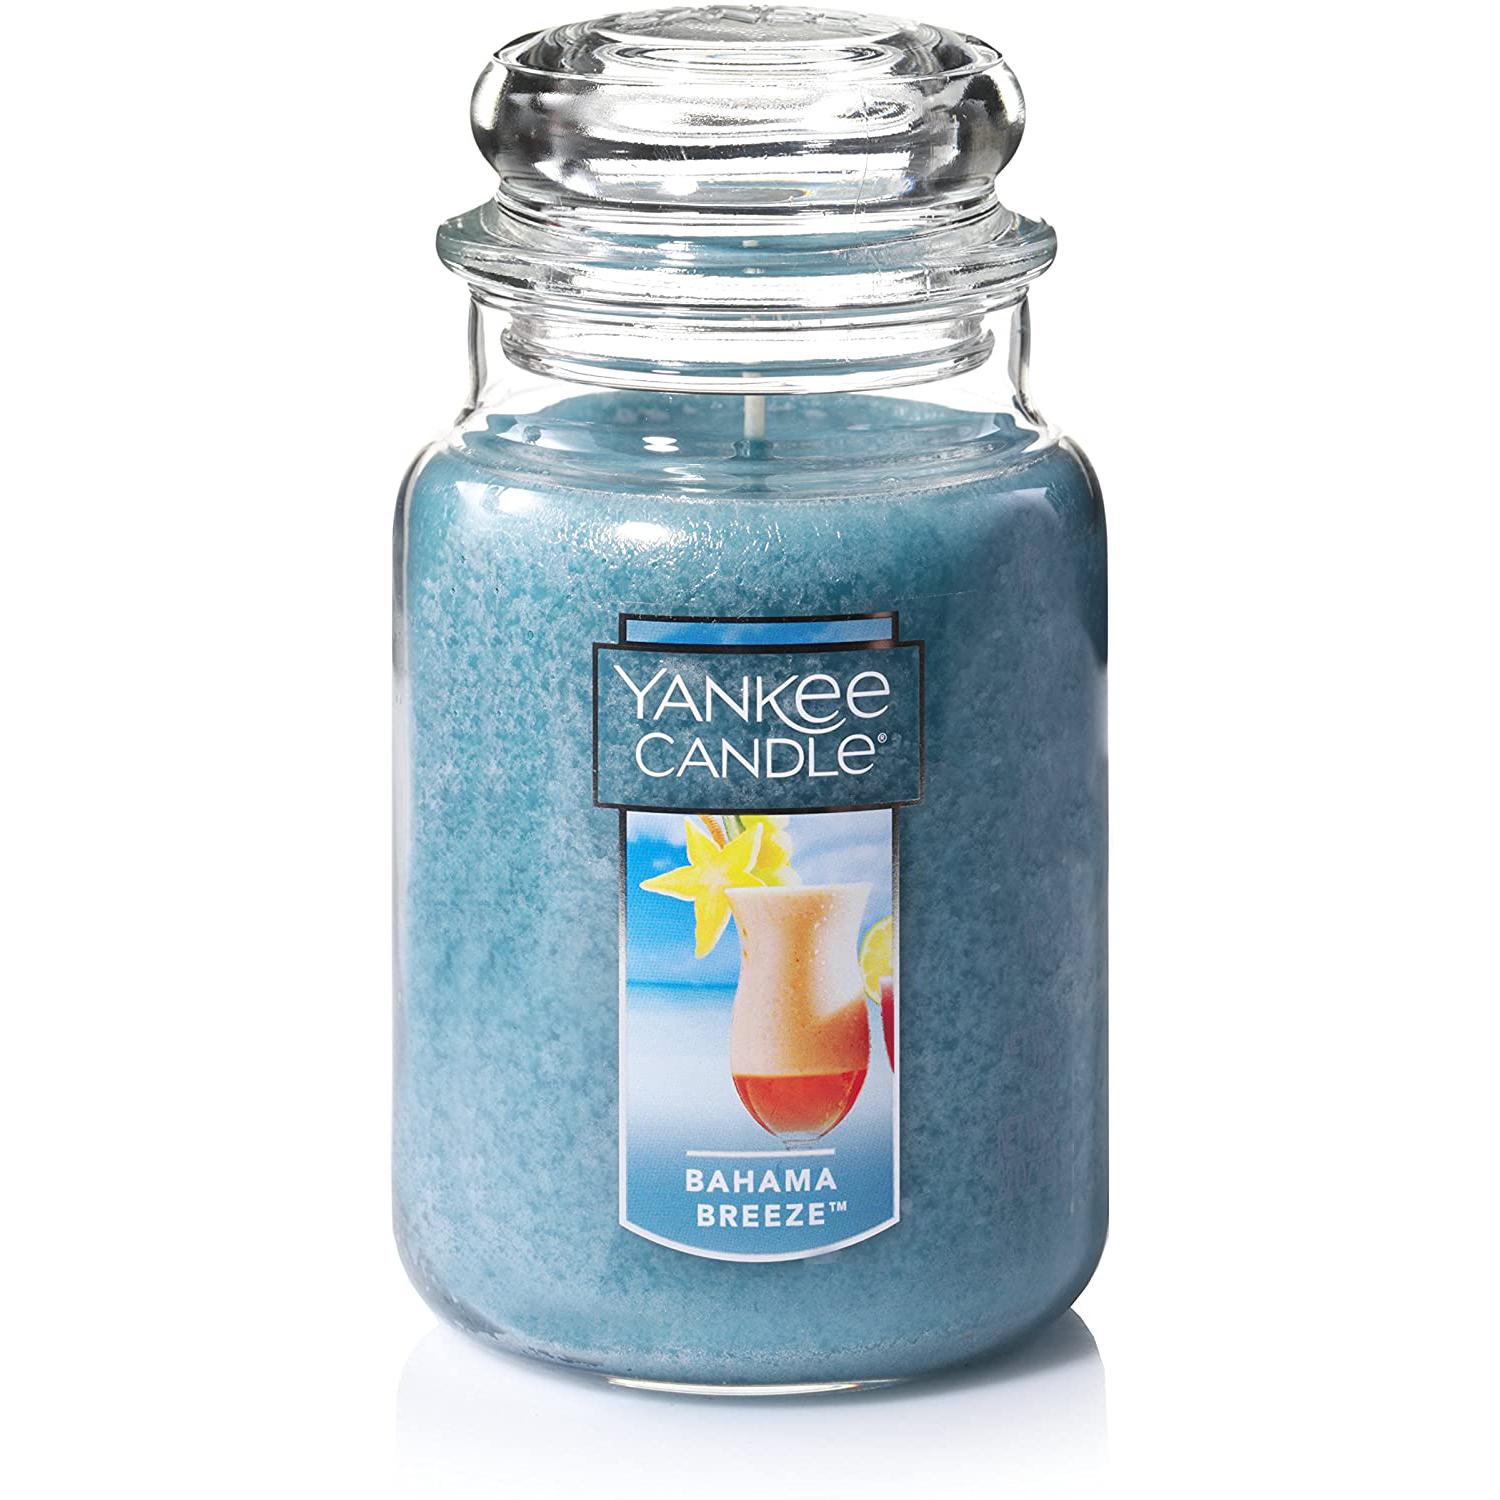 22Oz Yankee Large Jar Candle for $11.99